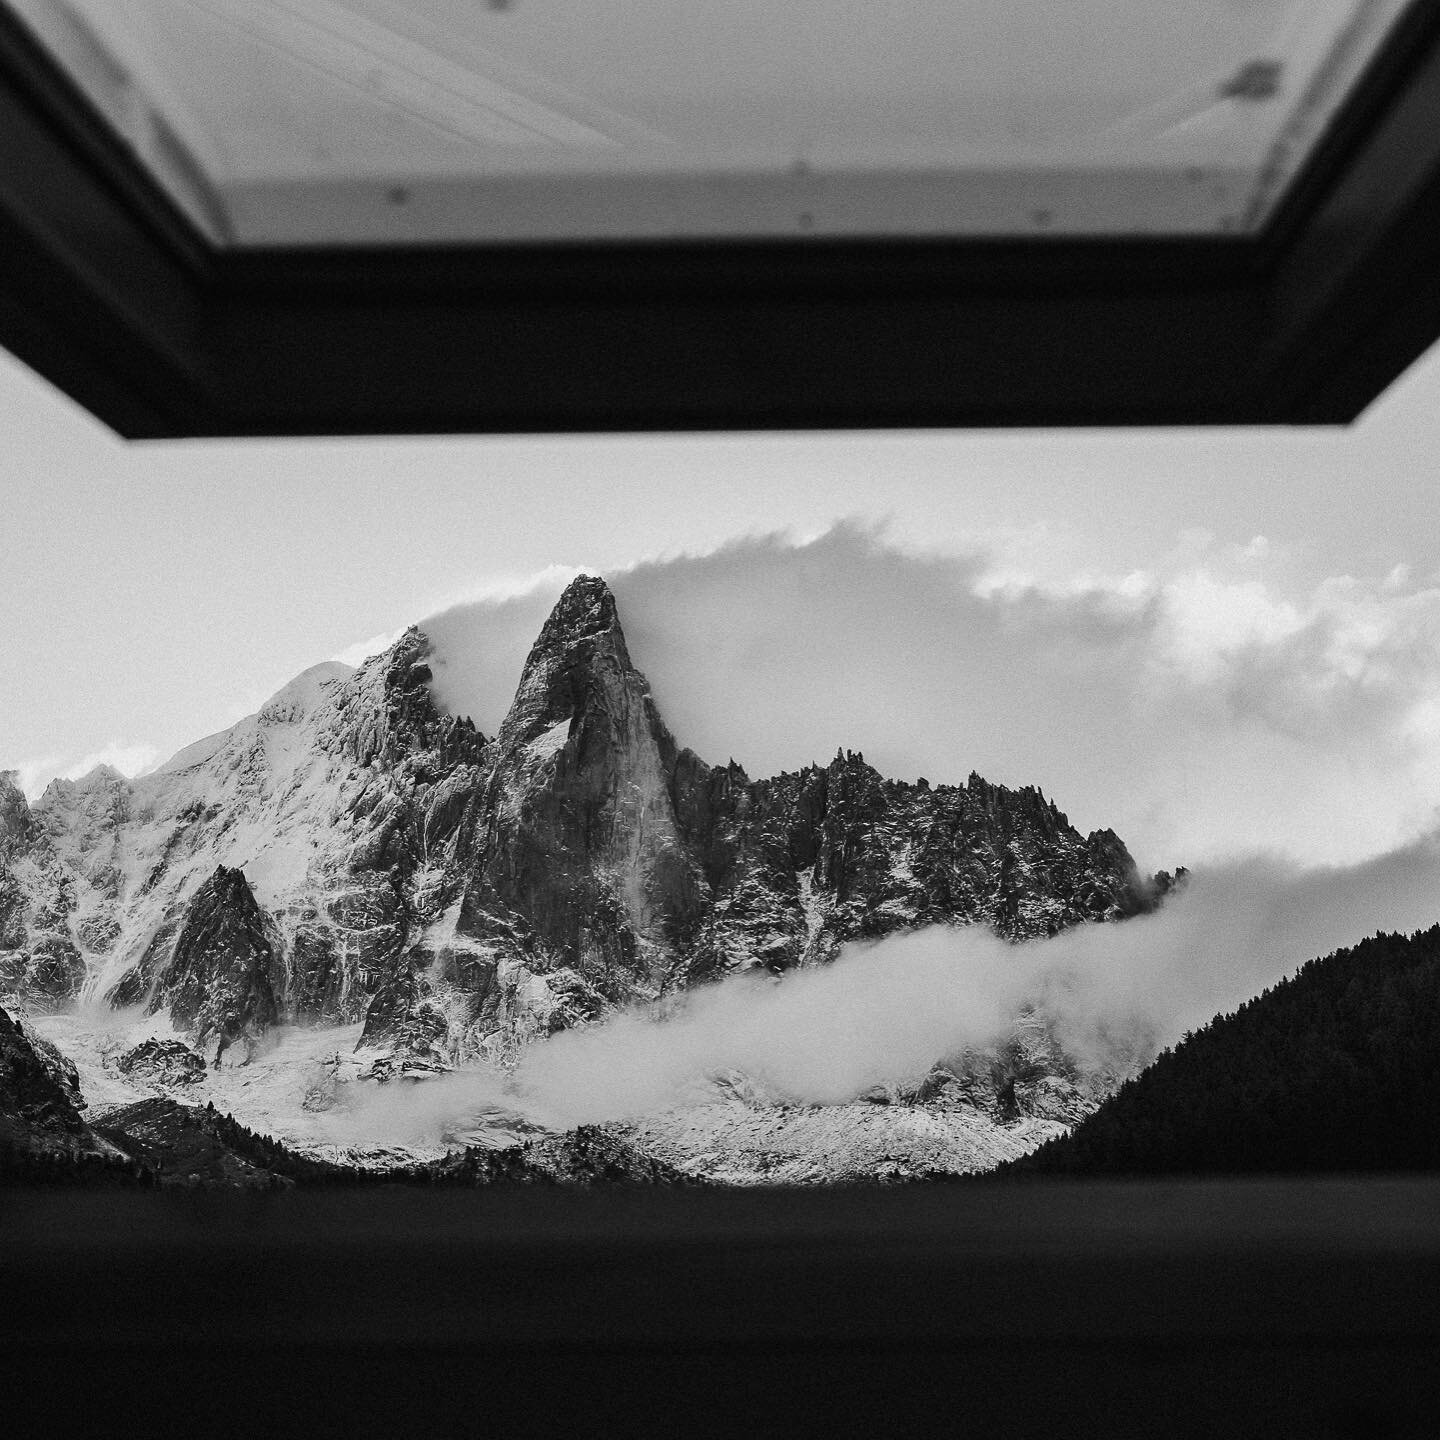 How&rsquo;s that for a bedroom window view? Chamonix showing off under a fresh blanket of snow. 

#chamonixmontblanc #chamonixvalley #auvergnerhonealpes #feelthealps #montblanc #bestofthealps #swissphotographer #fujiframez @fujifilmfrance